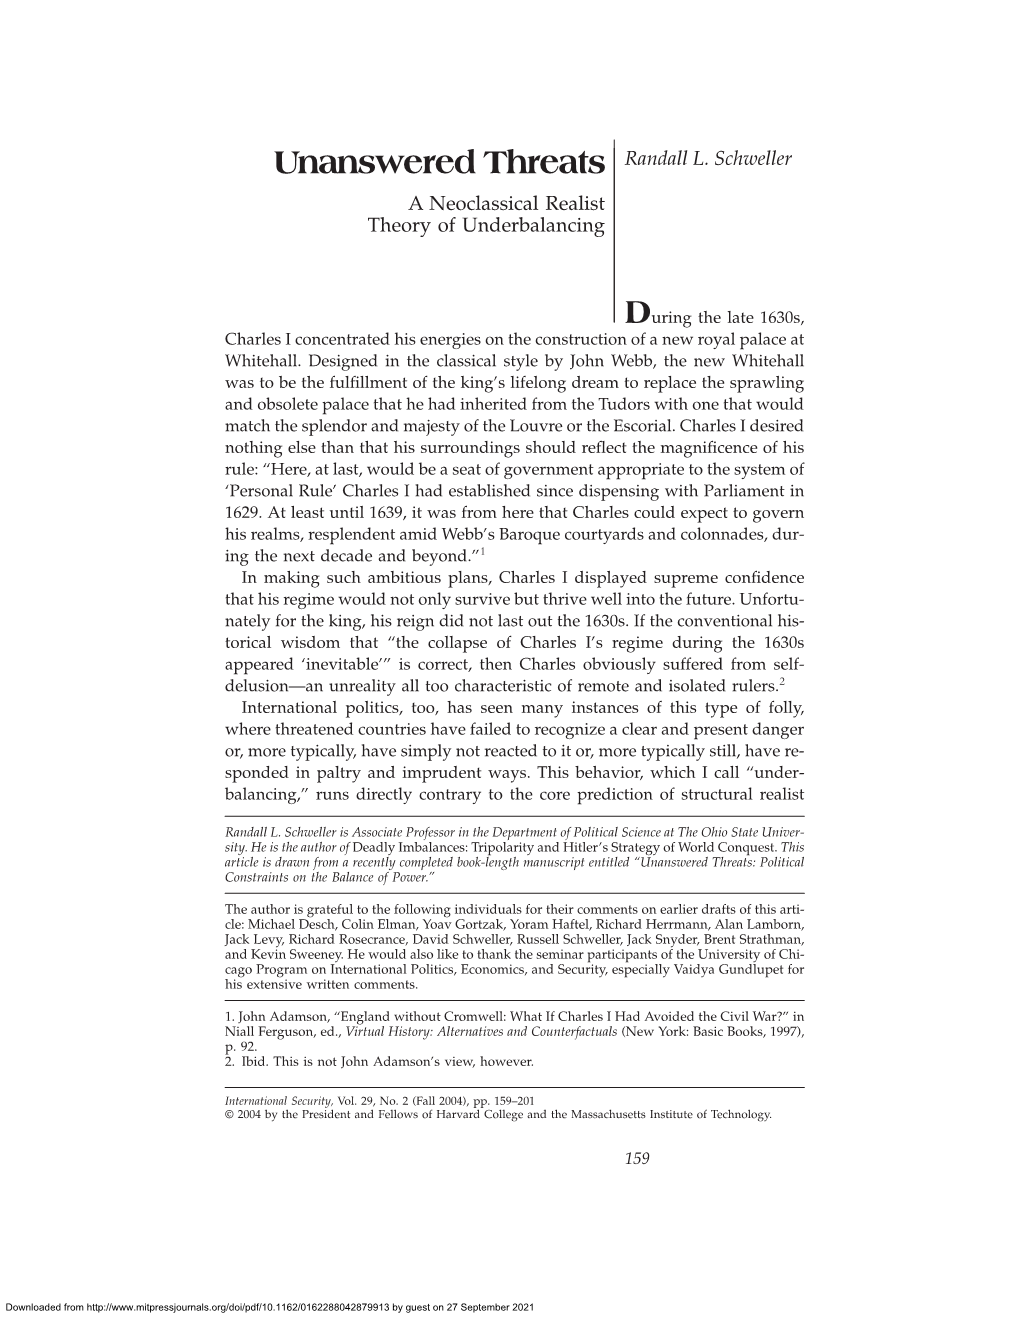 Unanswered Threats Randall L. Schweller a Neoclassical Realist Theory of Underbalancing